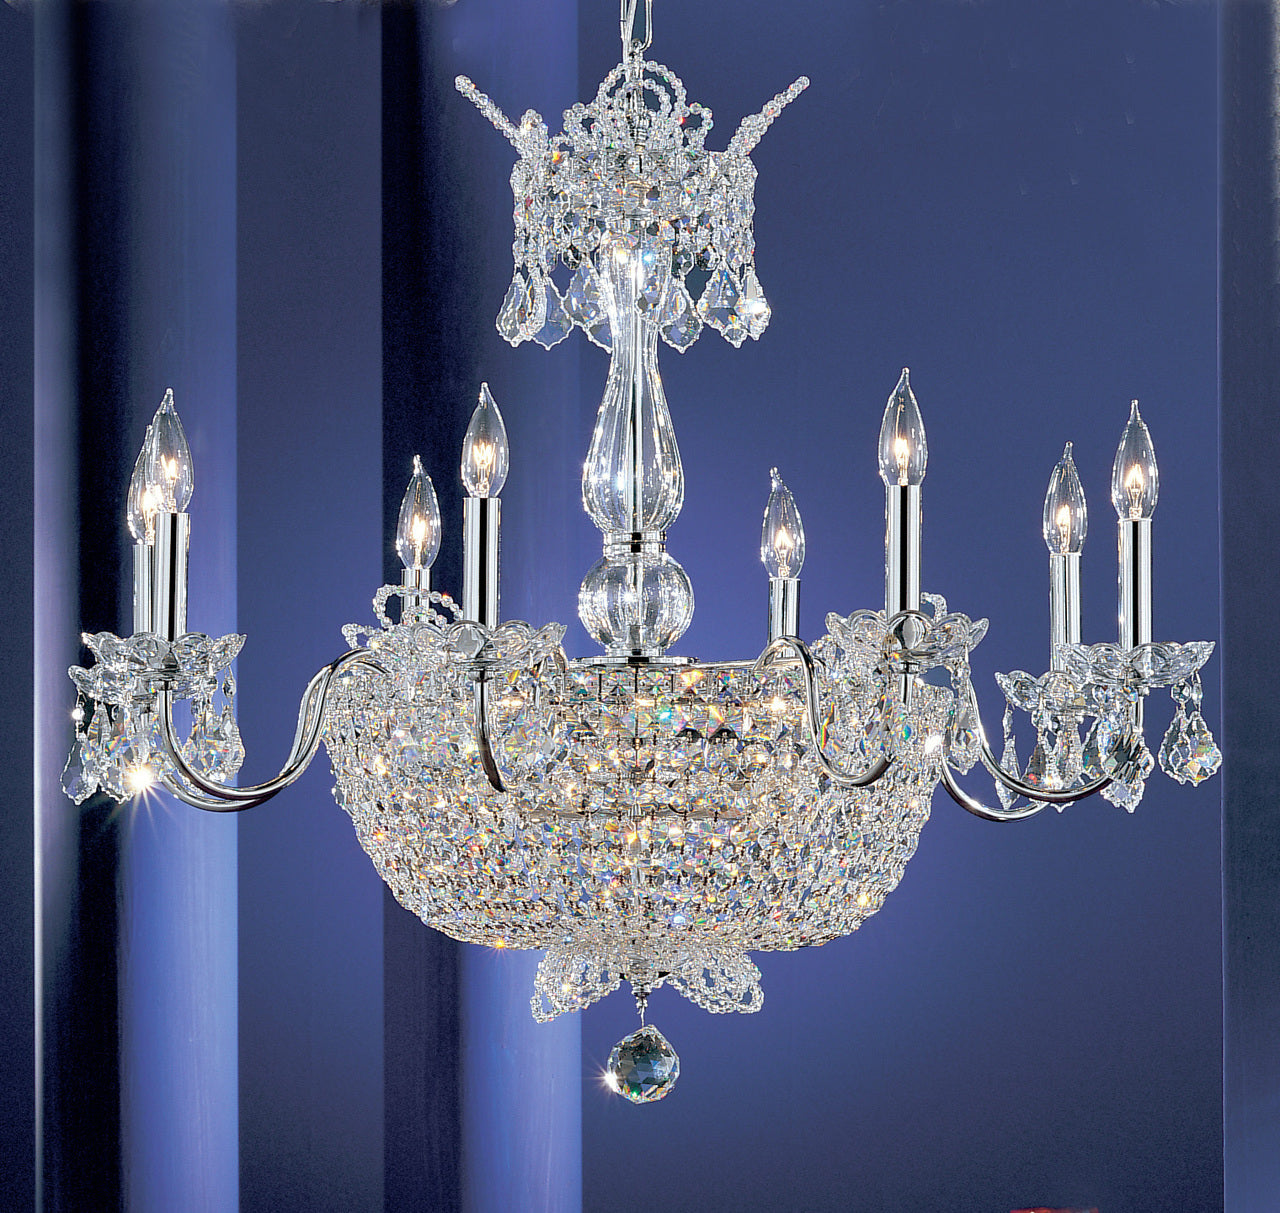 Classic Lighting 69788 CH SC Crown Jewels Crystal Chandelier in Chrome